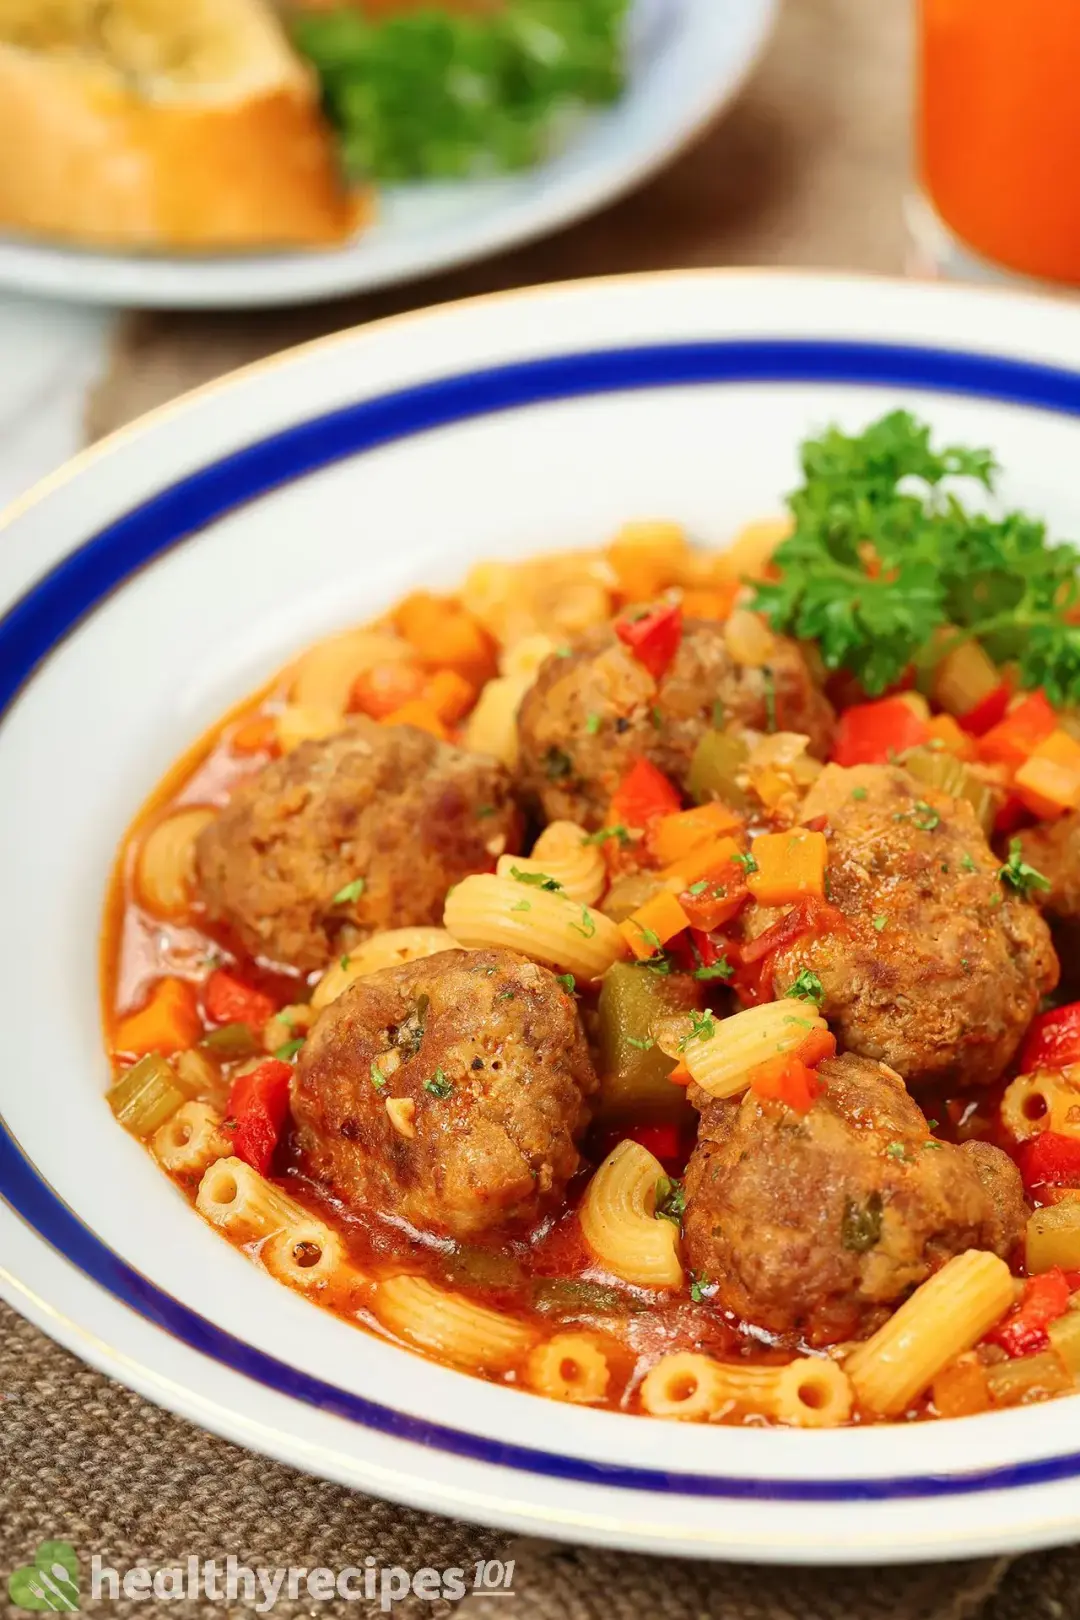 How Do You Keep Meatballs From Falling Apart in Soups